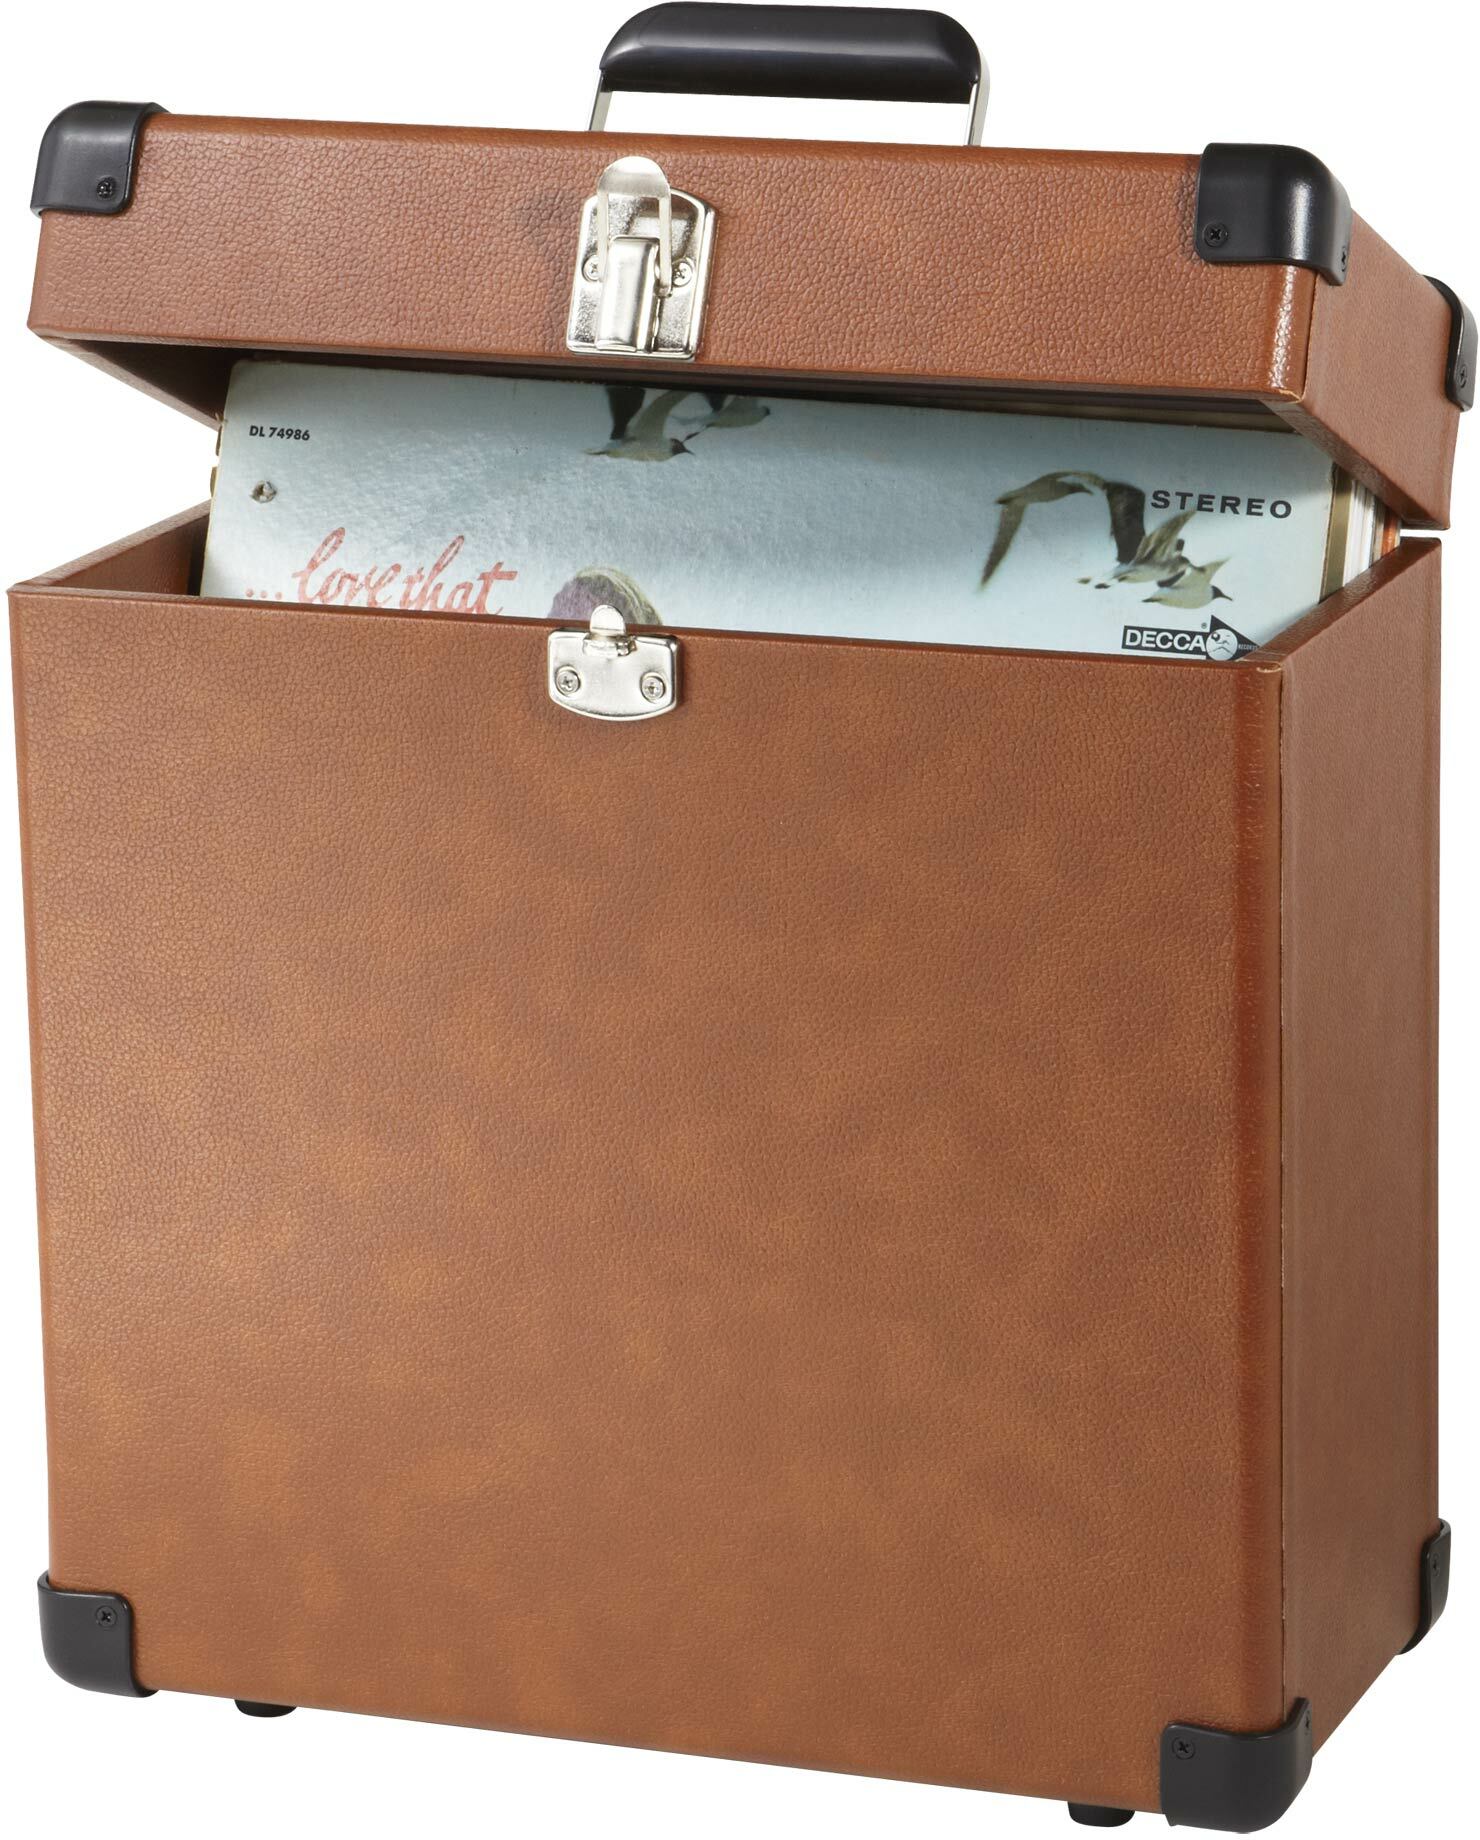 Crosley Record Carrier Case - DJ-Workstation - Main picture